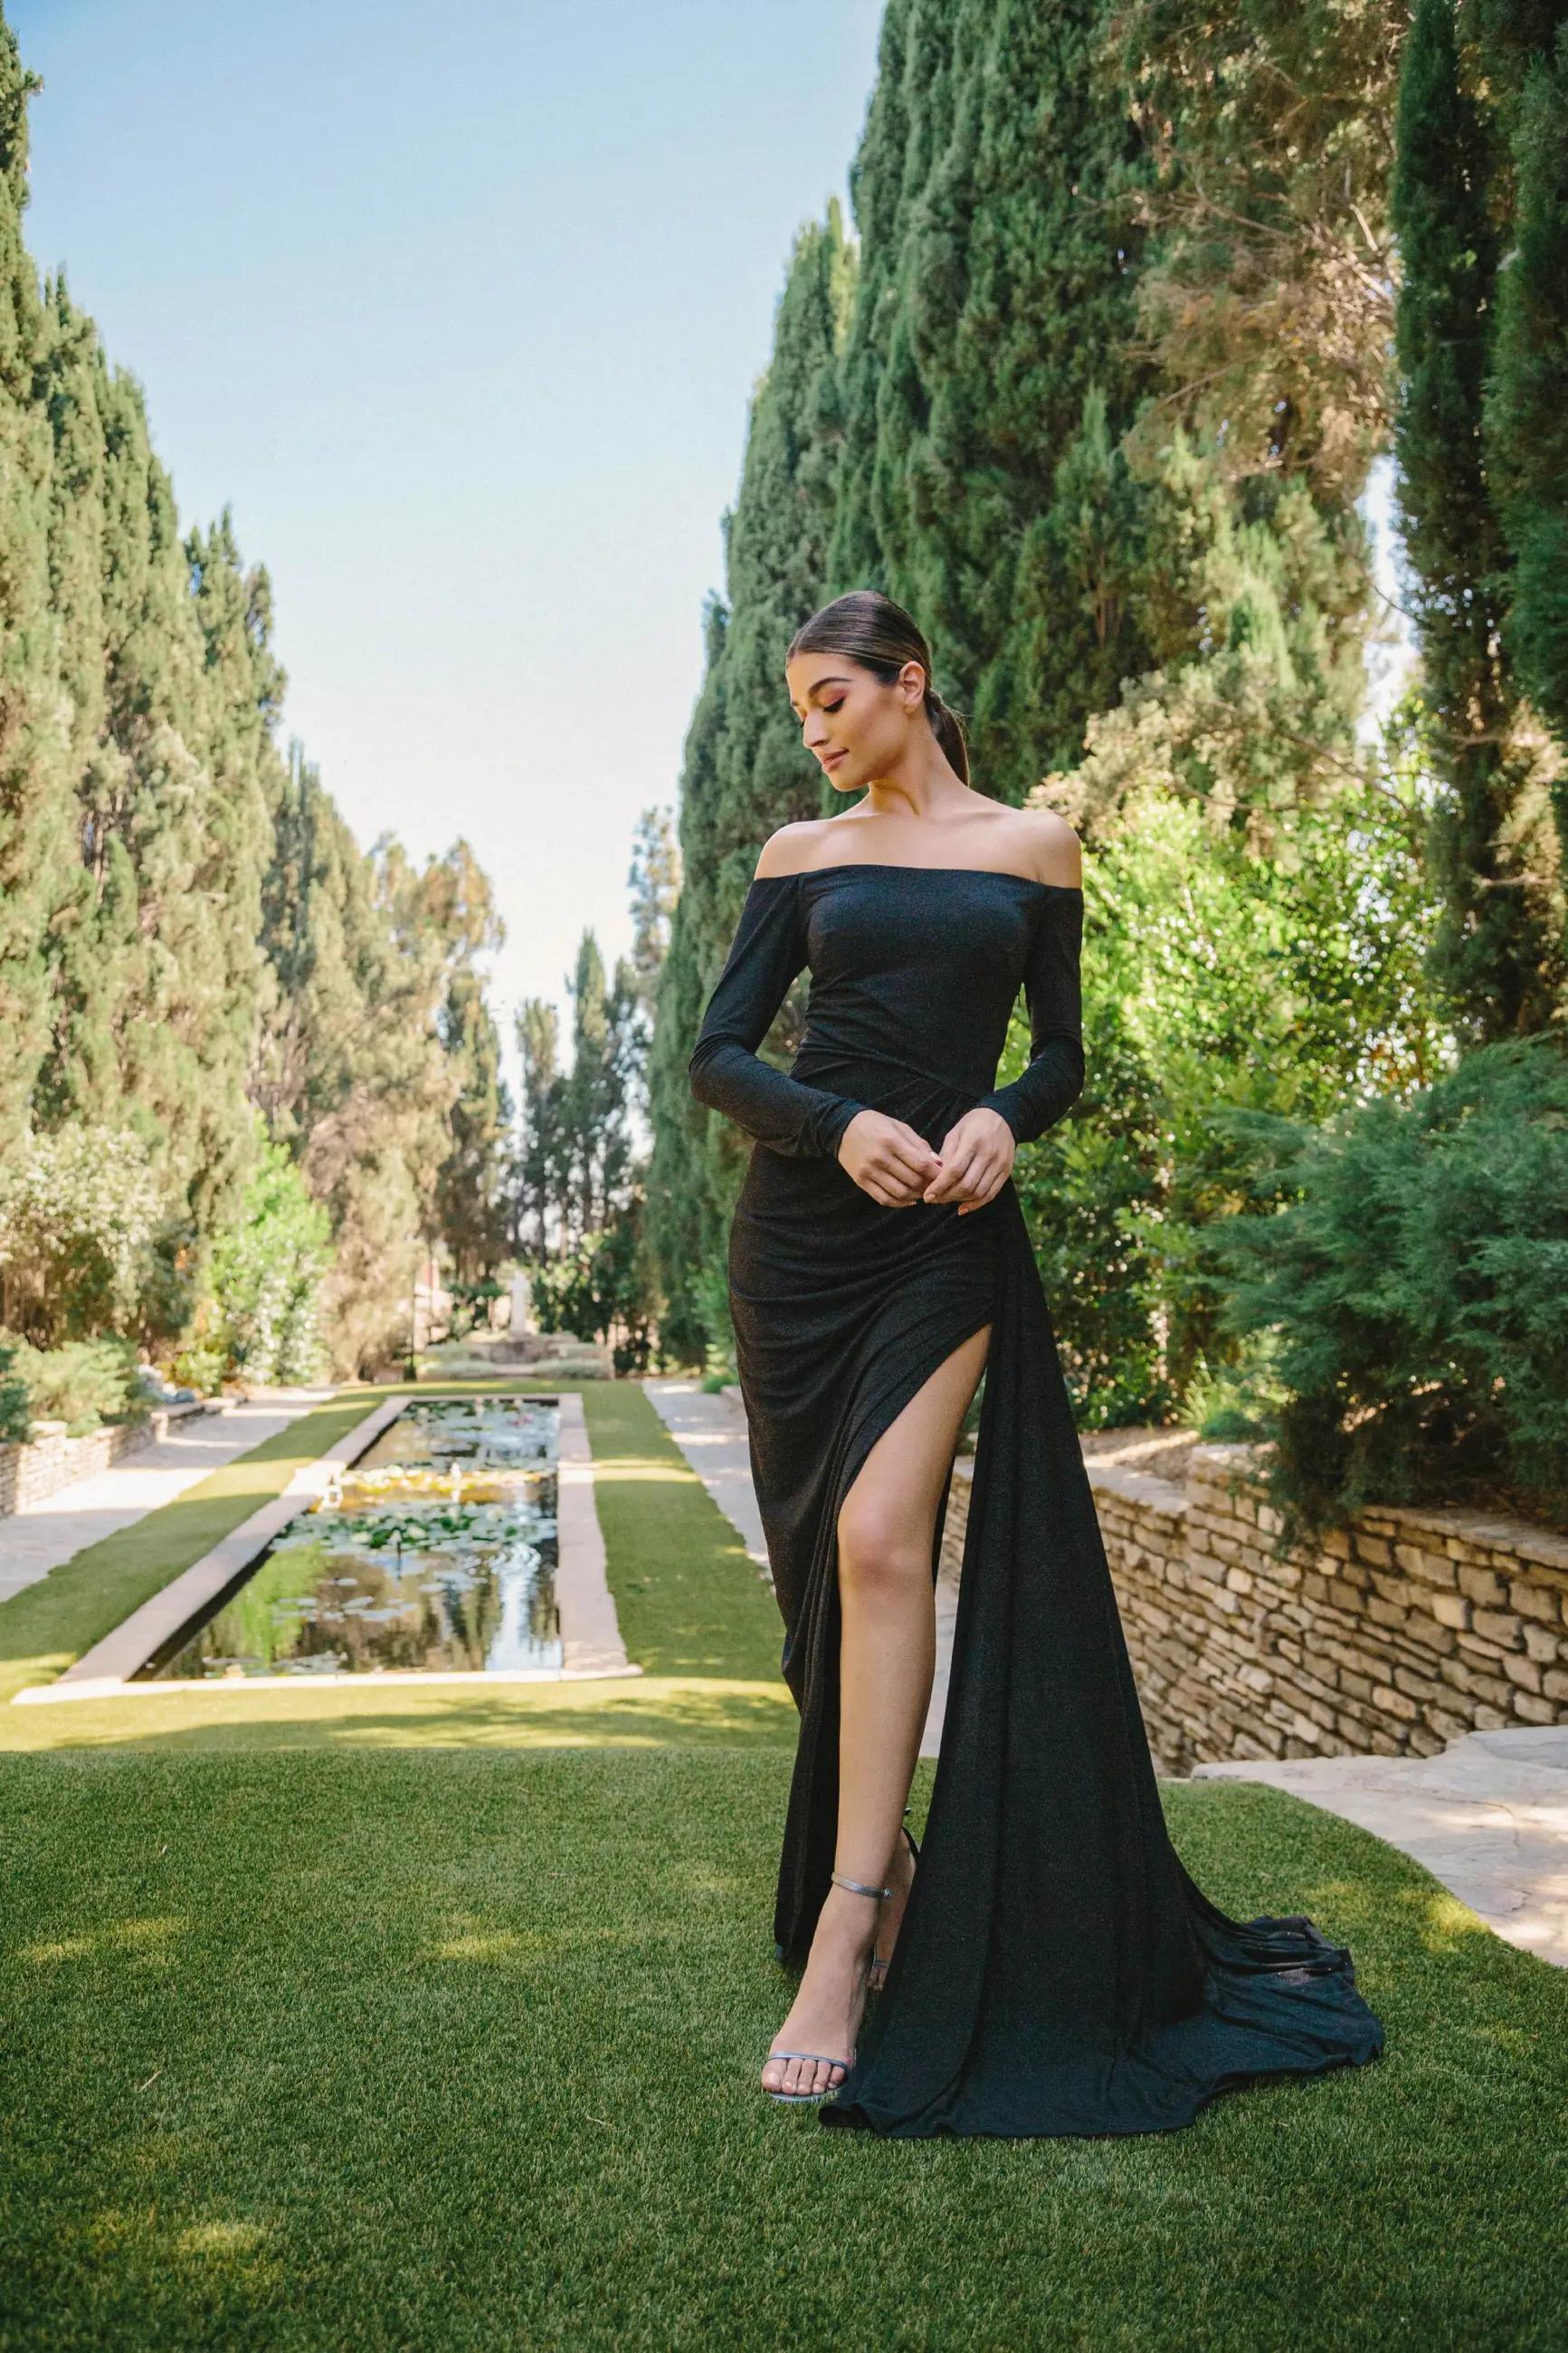 Model wearing a long black evening gown standing at the garden